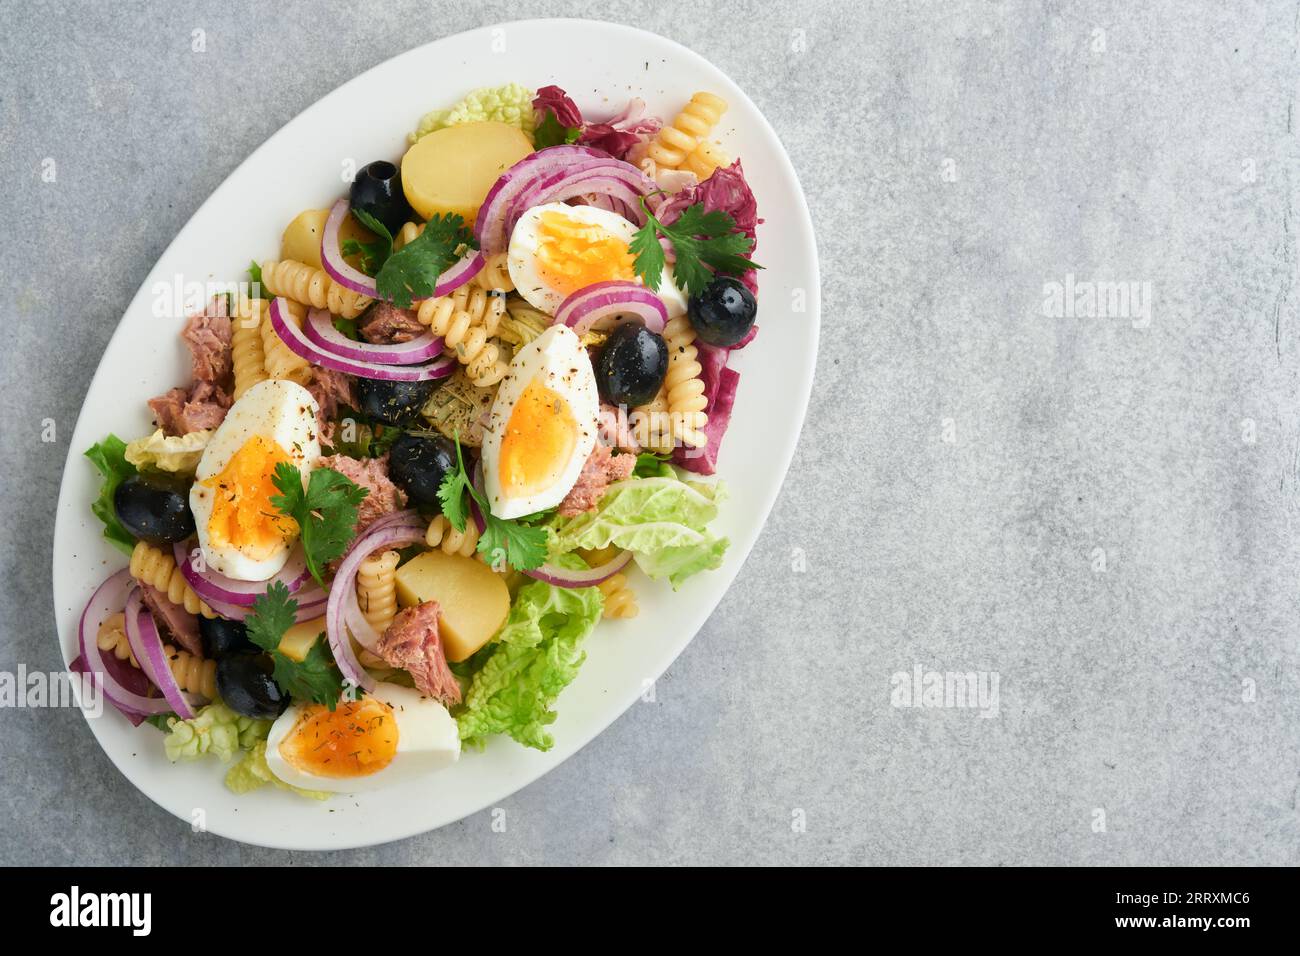 Tuna salad with pasta, eggs, potatoes, olives, red onions and sauce in white plate on old light gray concrete table background. Nicoise salad. French Stock Photo